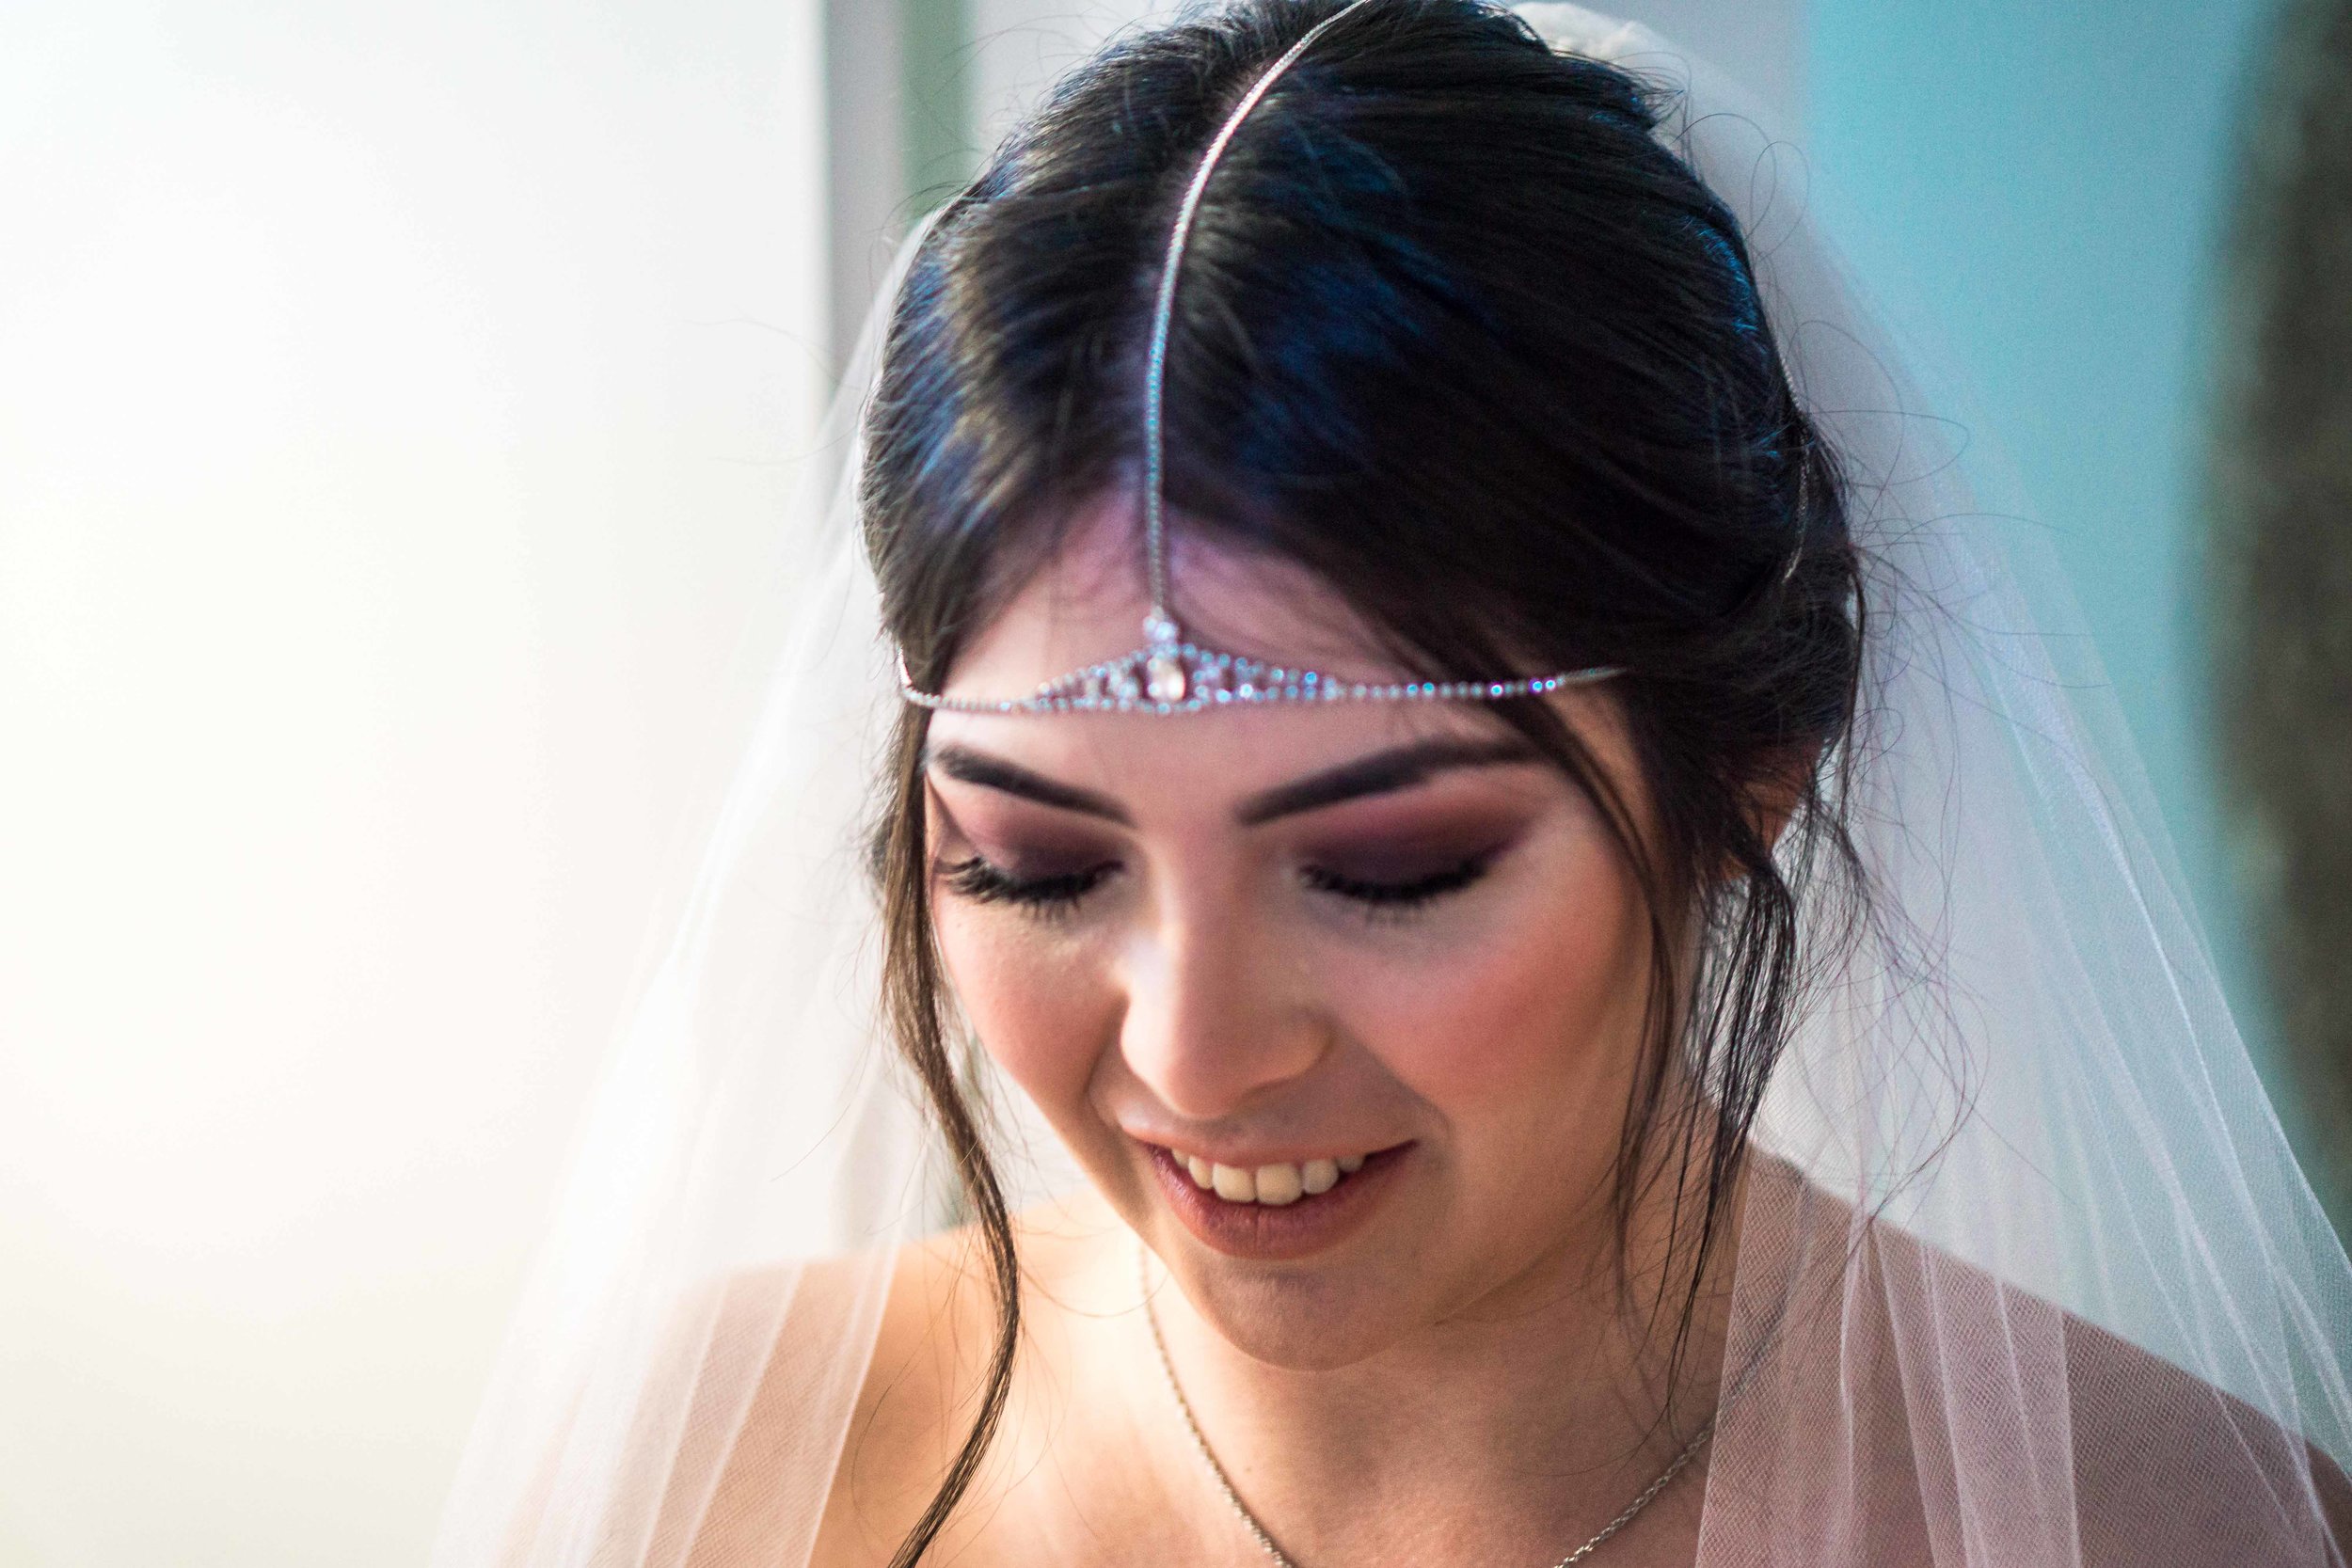 Bride with her veil headdress before the ceremony